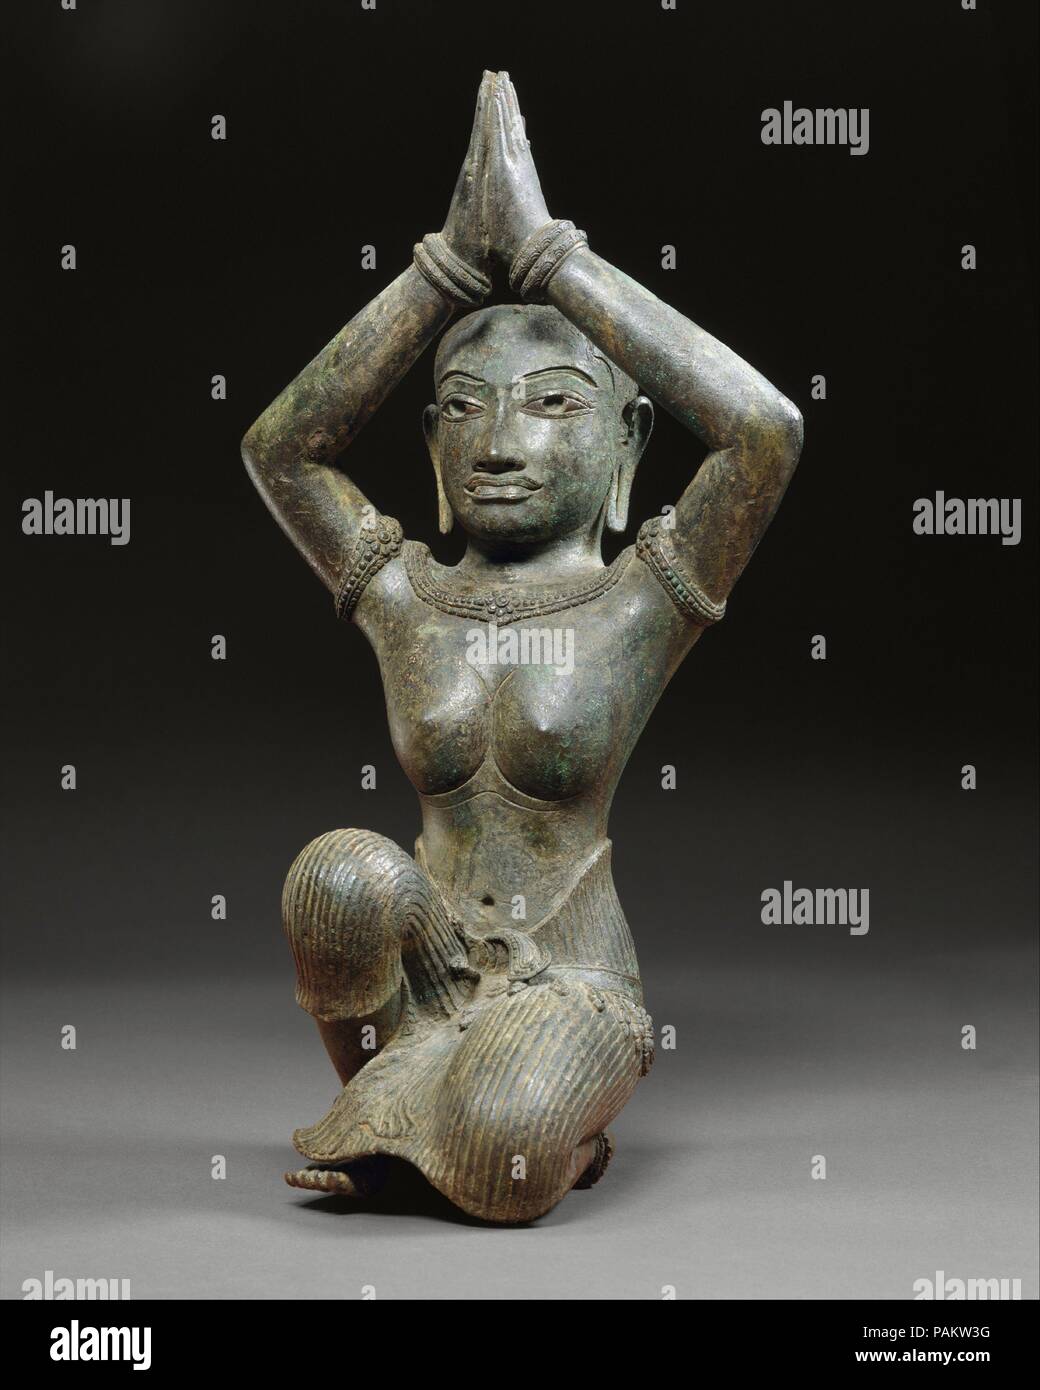 Kneeling Female. Culture: Cambodia. Dimensions: H. 17 (43.2 cm); W. (at knees) 7 3/4 in. (19.7 cm). Date: second half of the 11th century.  This figure, perhaps a Khmer queen, kneels in a posture of adoration with arms raised above her head and palms pressed together. This pose suggests the presence originally of another statue--a god or god-king whom she was worshiping. There are indications that the figure was originally completely gilded. Her eyes are inlaid with silver, and her pupils and brows are hollowed out to receive an inlay, perhaps of black glass. Museum: Metropolitan Museum of Art Stock Photo